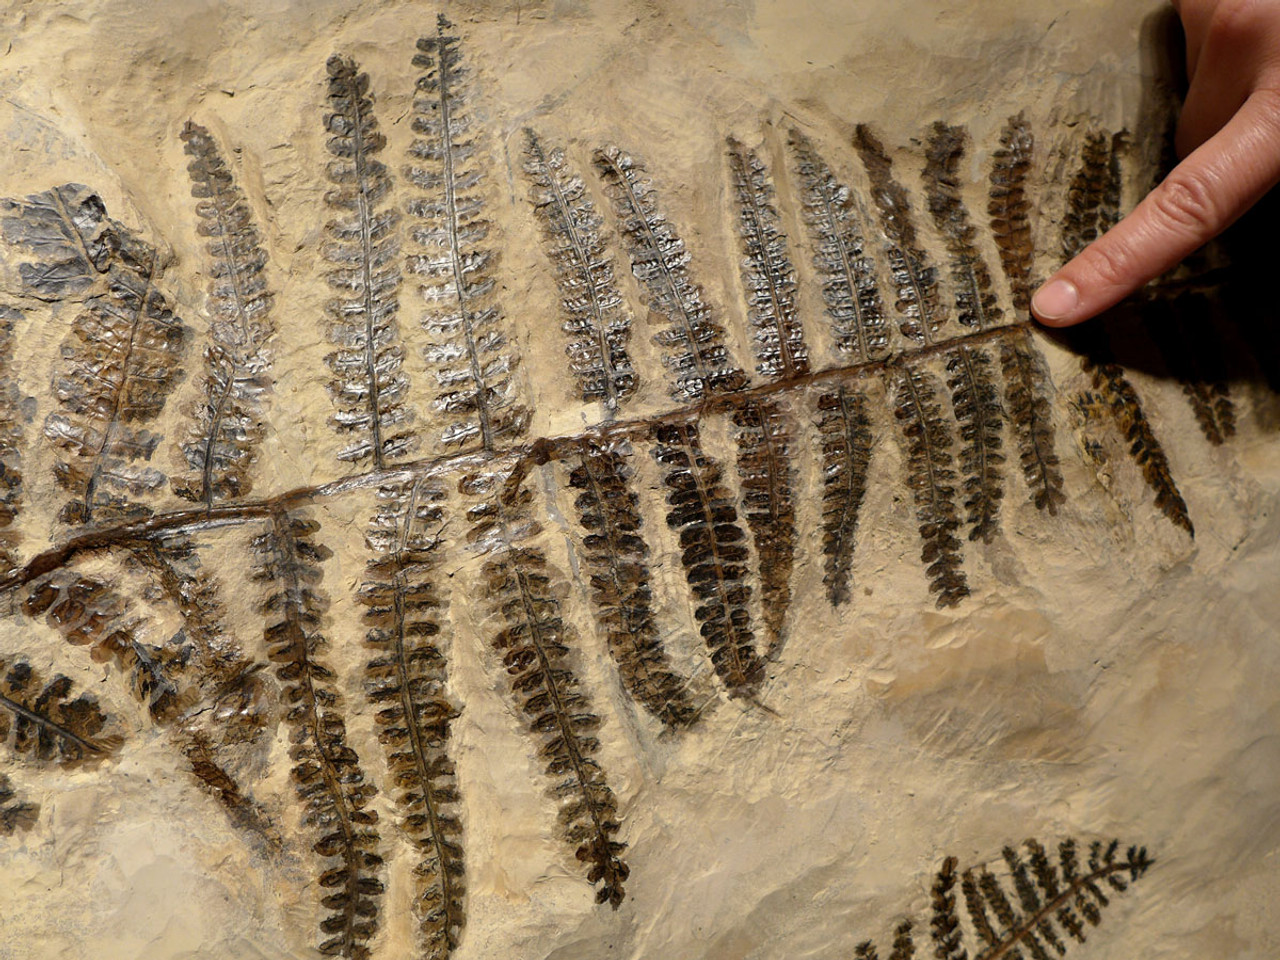 MASSIVE PREHISTORIC PERMIAN SEED FERN PLANT FOSSIL FROM BEFORE THE  DINOSAURS *PLX002 - TIME VAULT GALLERY